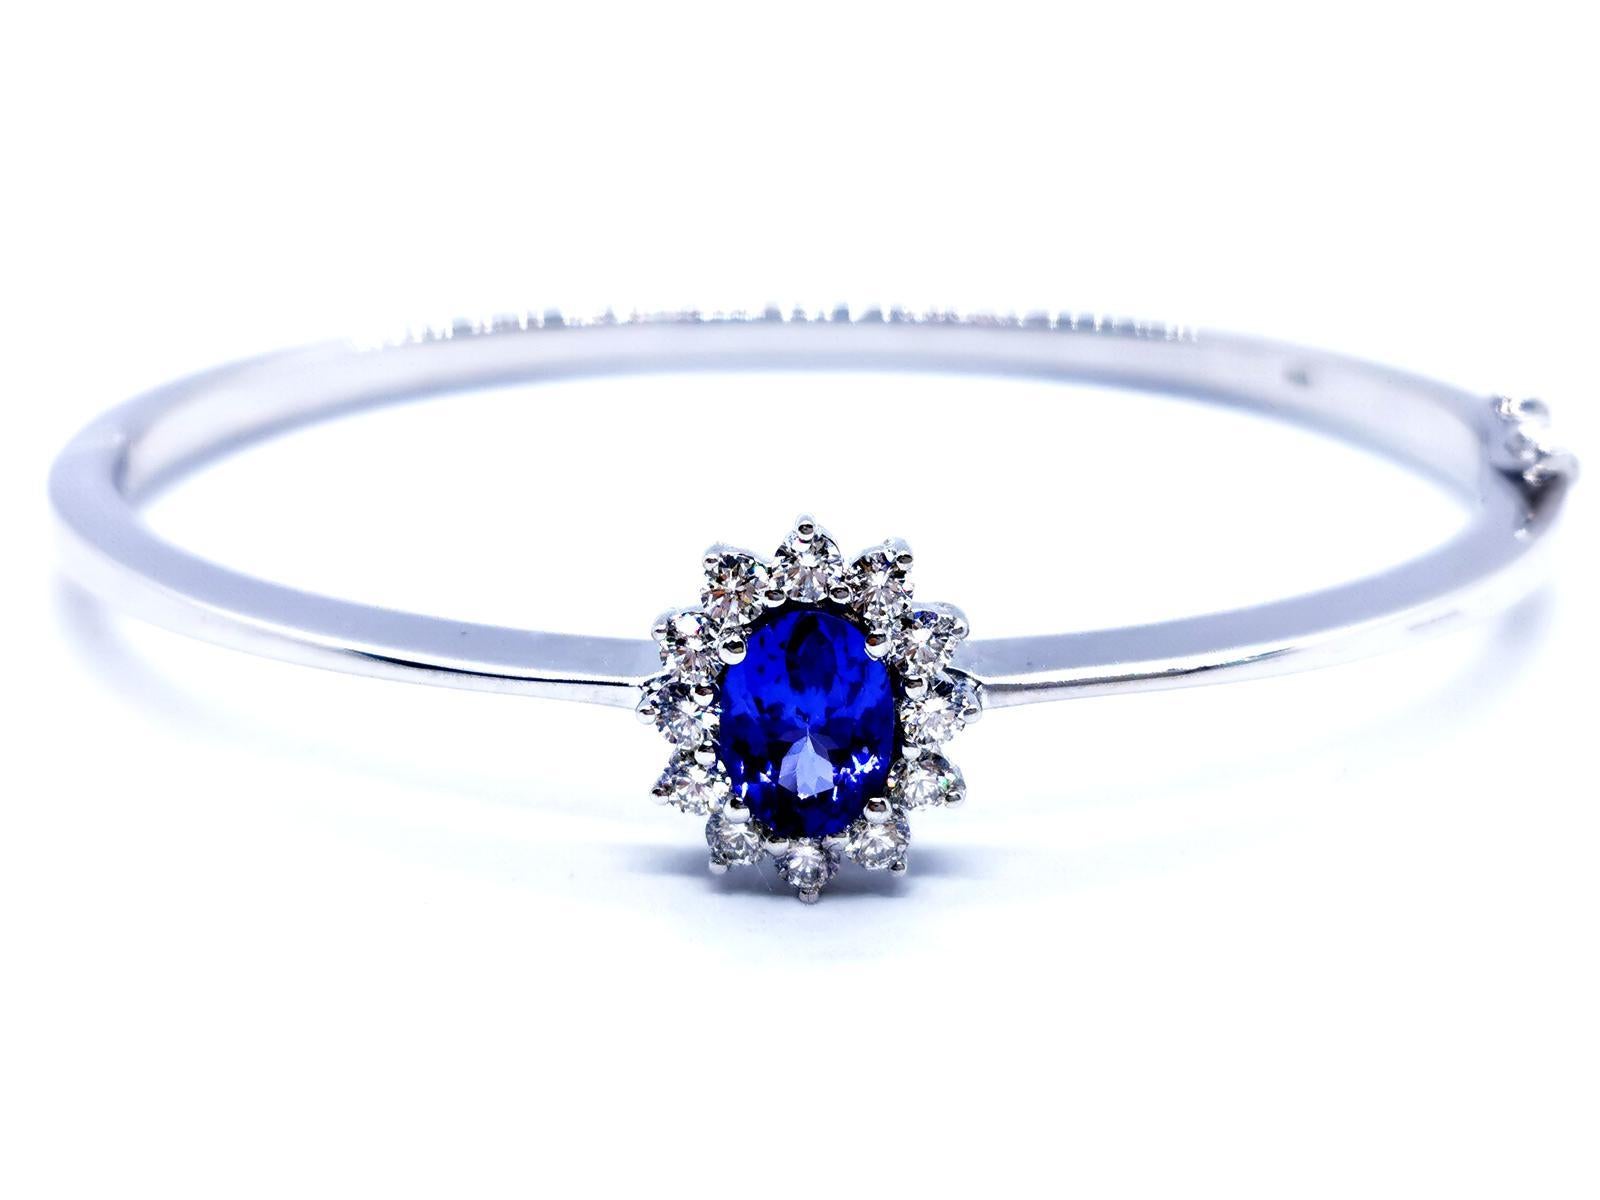 Bangle opening. white gold 750 mils (18 carats). oval. flower pattern. set in the center of a beautiful oval tanzanite dimensions 7.8 mm x 5.8 mm. surrounded by 12 brilliant-cut diamonds. for about 0.42 ct total height: 18 cm. inner diameter: 6 cm x